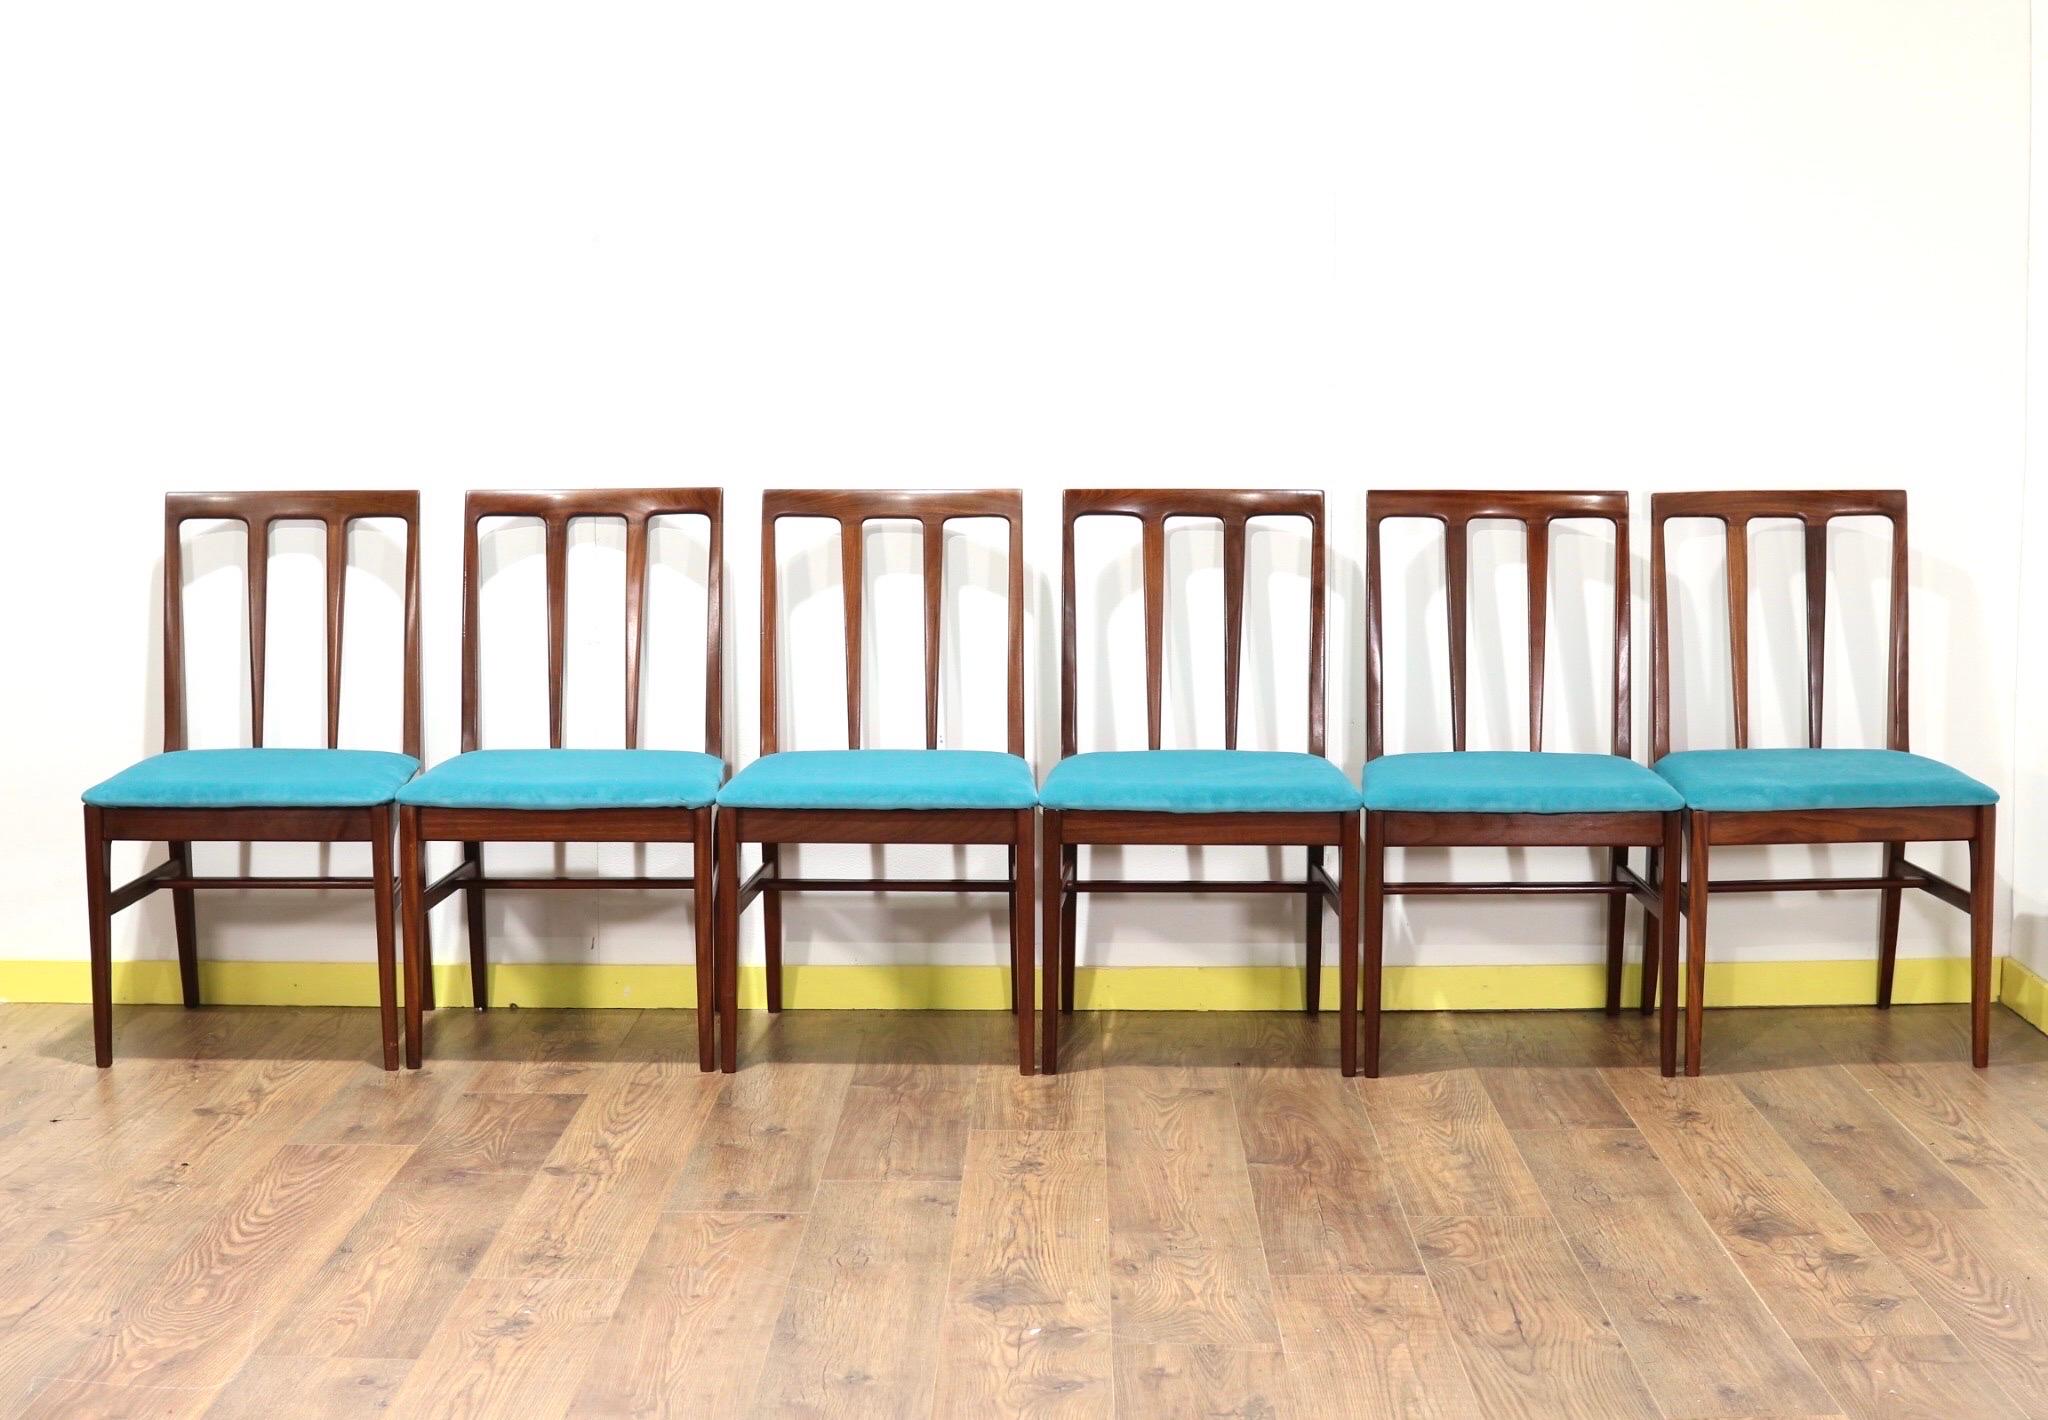 A fantastic set of 6 dining chairs by British furniture maker, A Younger. The frames are made from Afromosia and the pads have been recently coverded in teal material that give the chairs a stunning look.